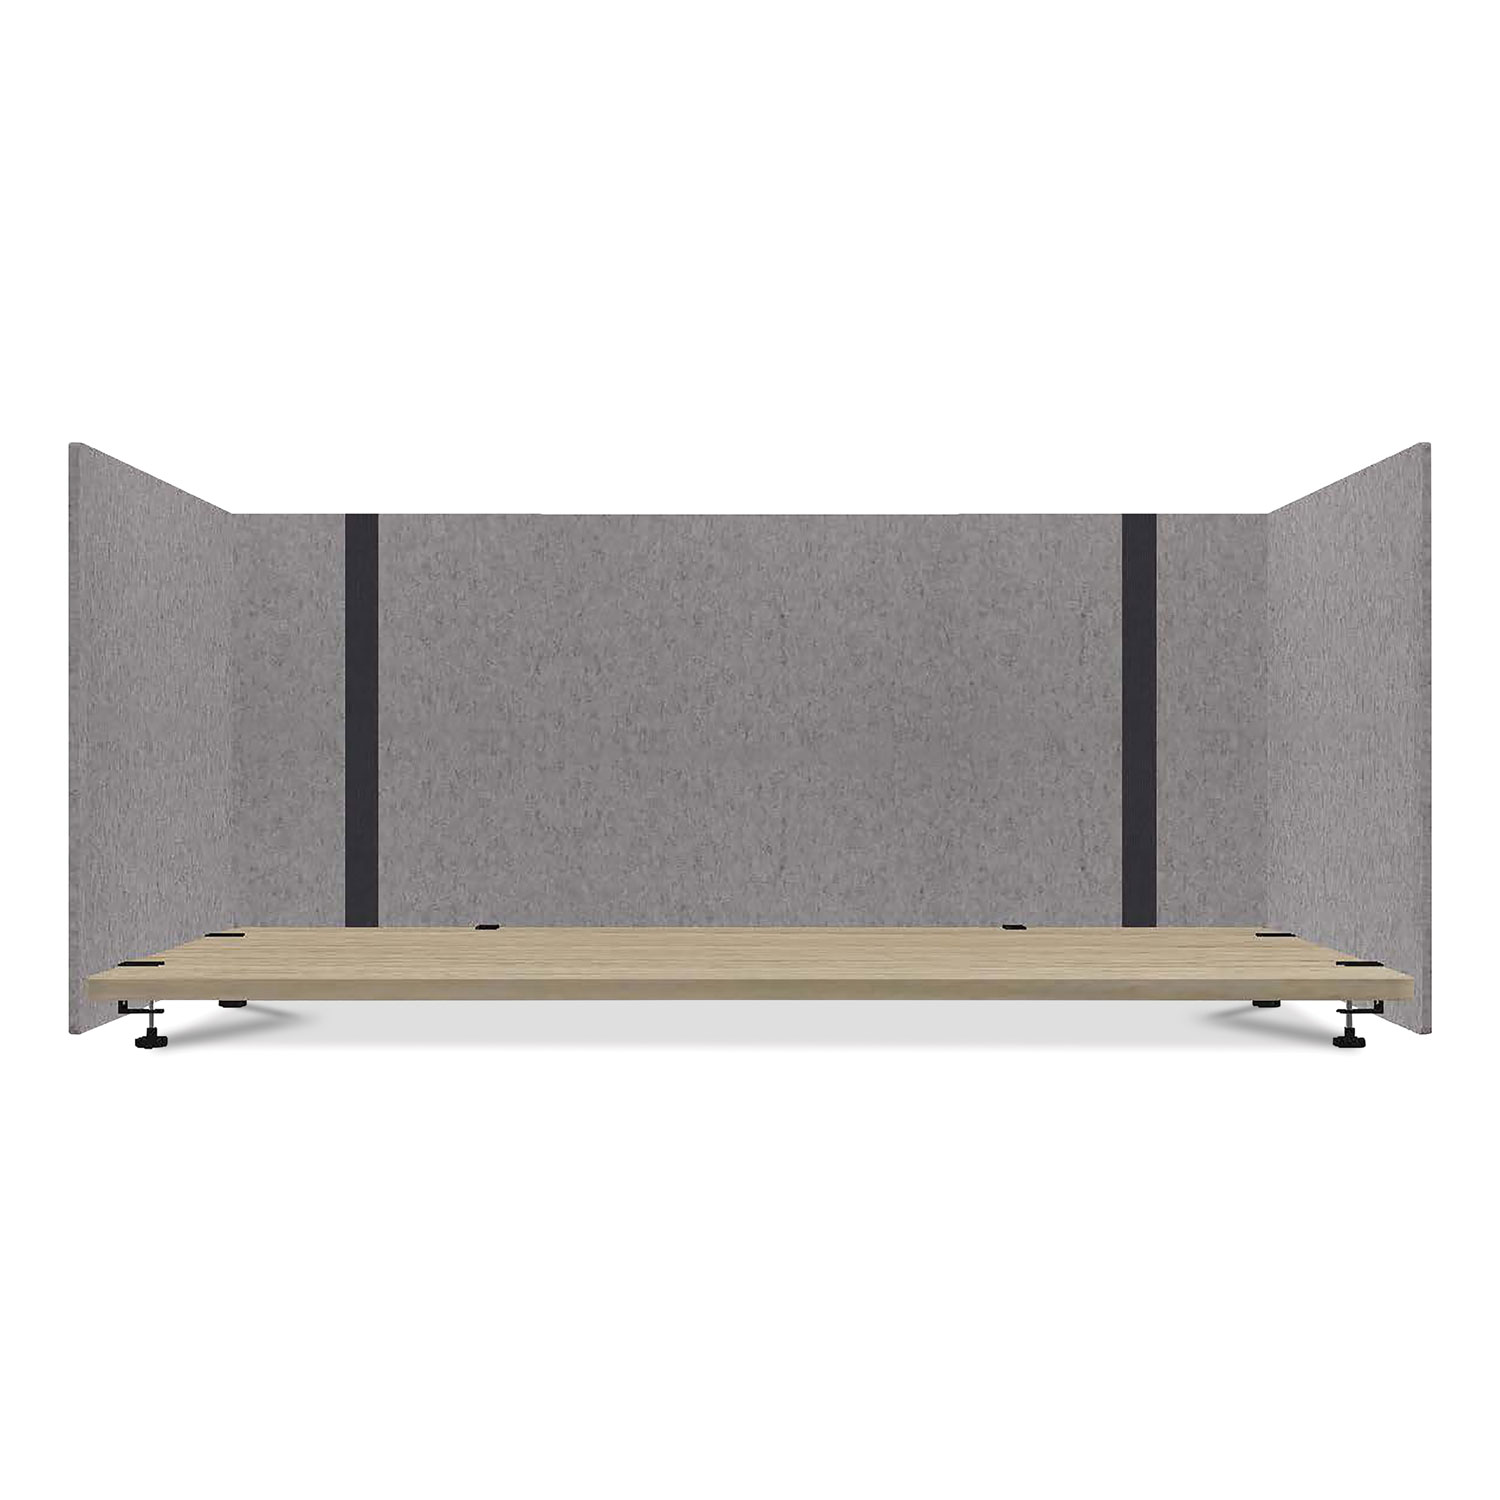 Lumeah Adjustable Desk Screen with Returns, 48 to 78 x 29 x 26.5, Polyester, Gray